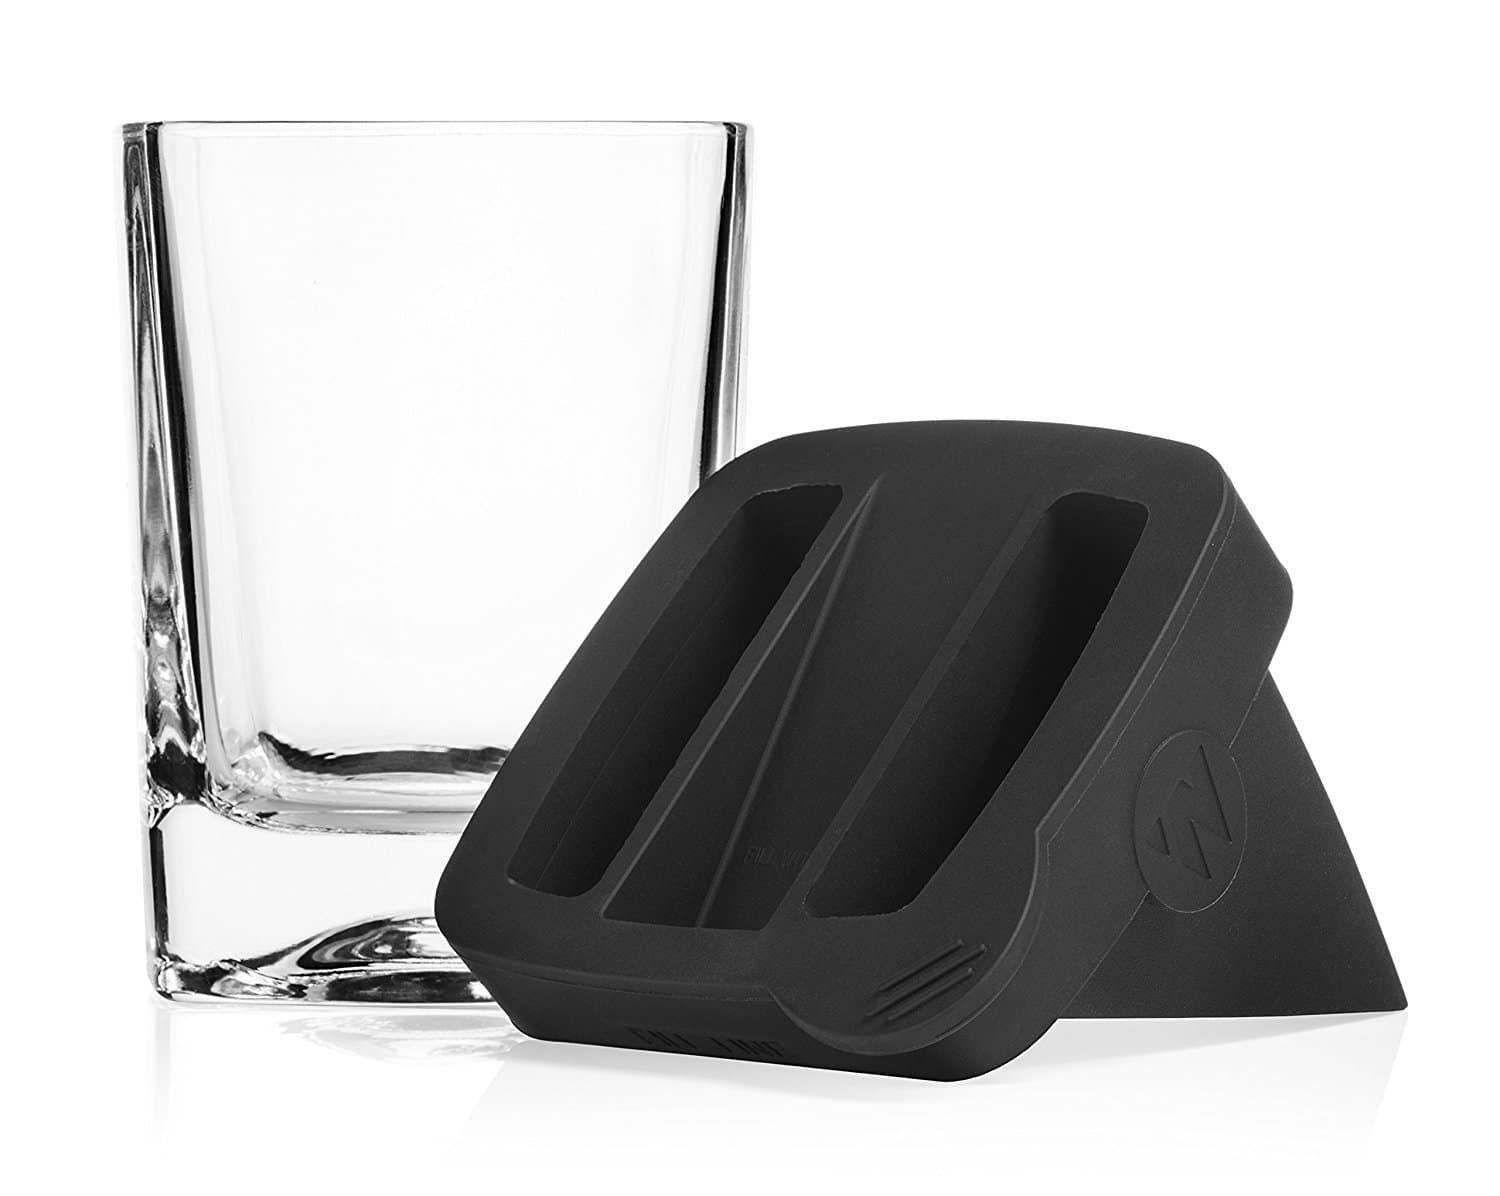 Whiskey Wedge Ice Mould